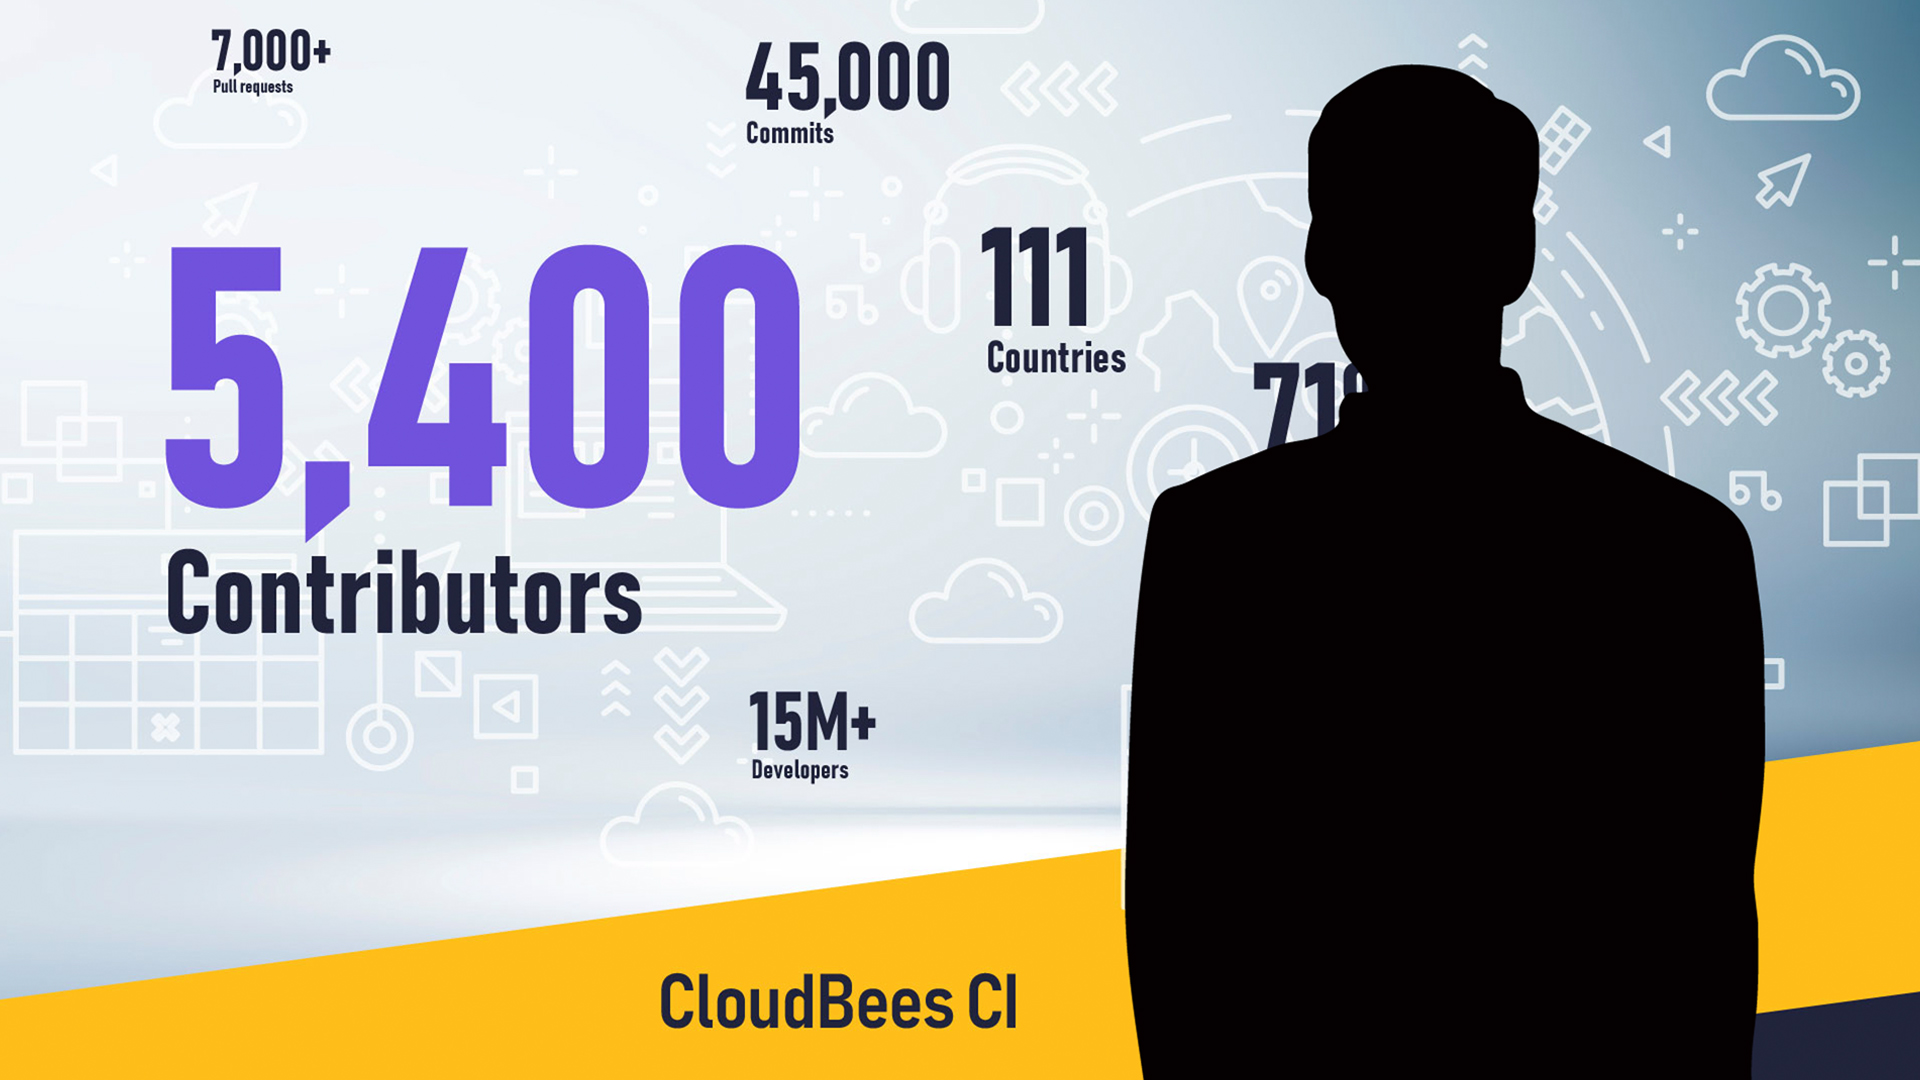 DevOps World 2020 presenter graphic displaying CloudBees CI numbers.